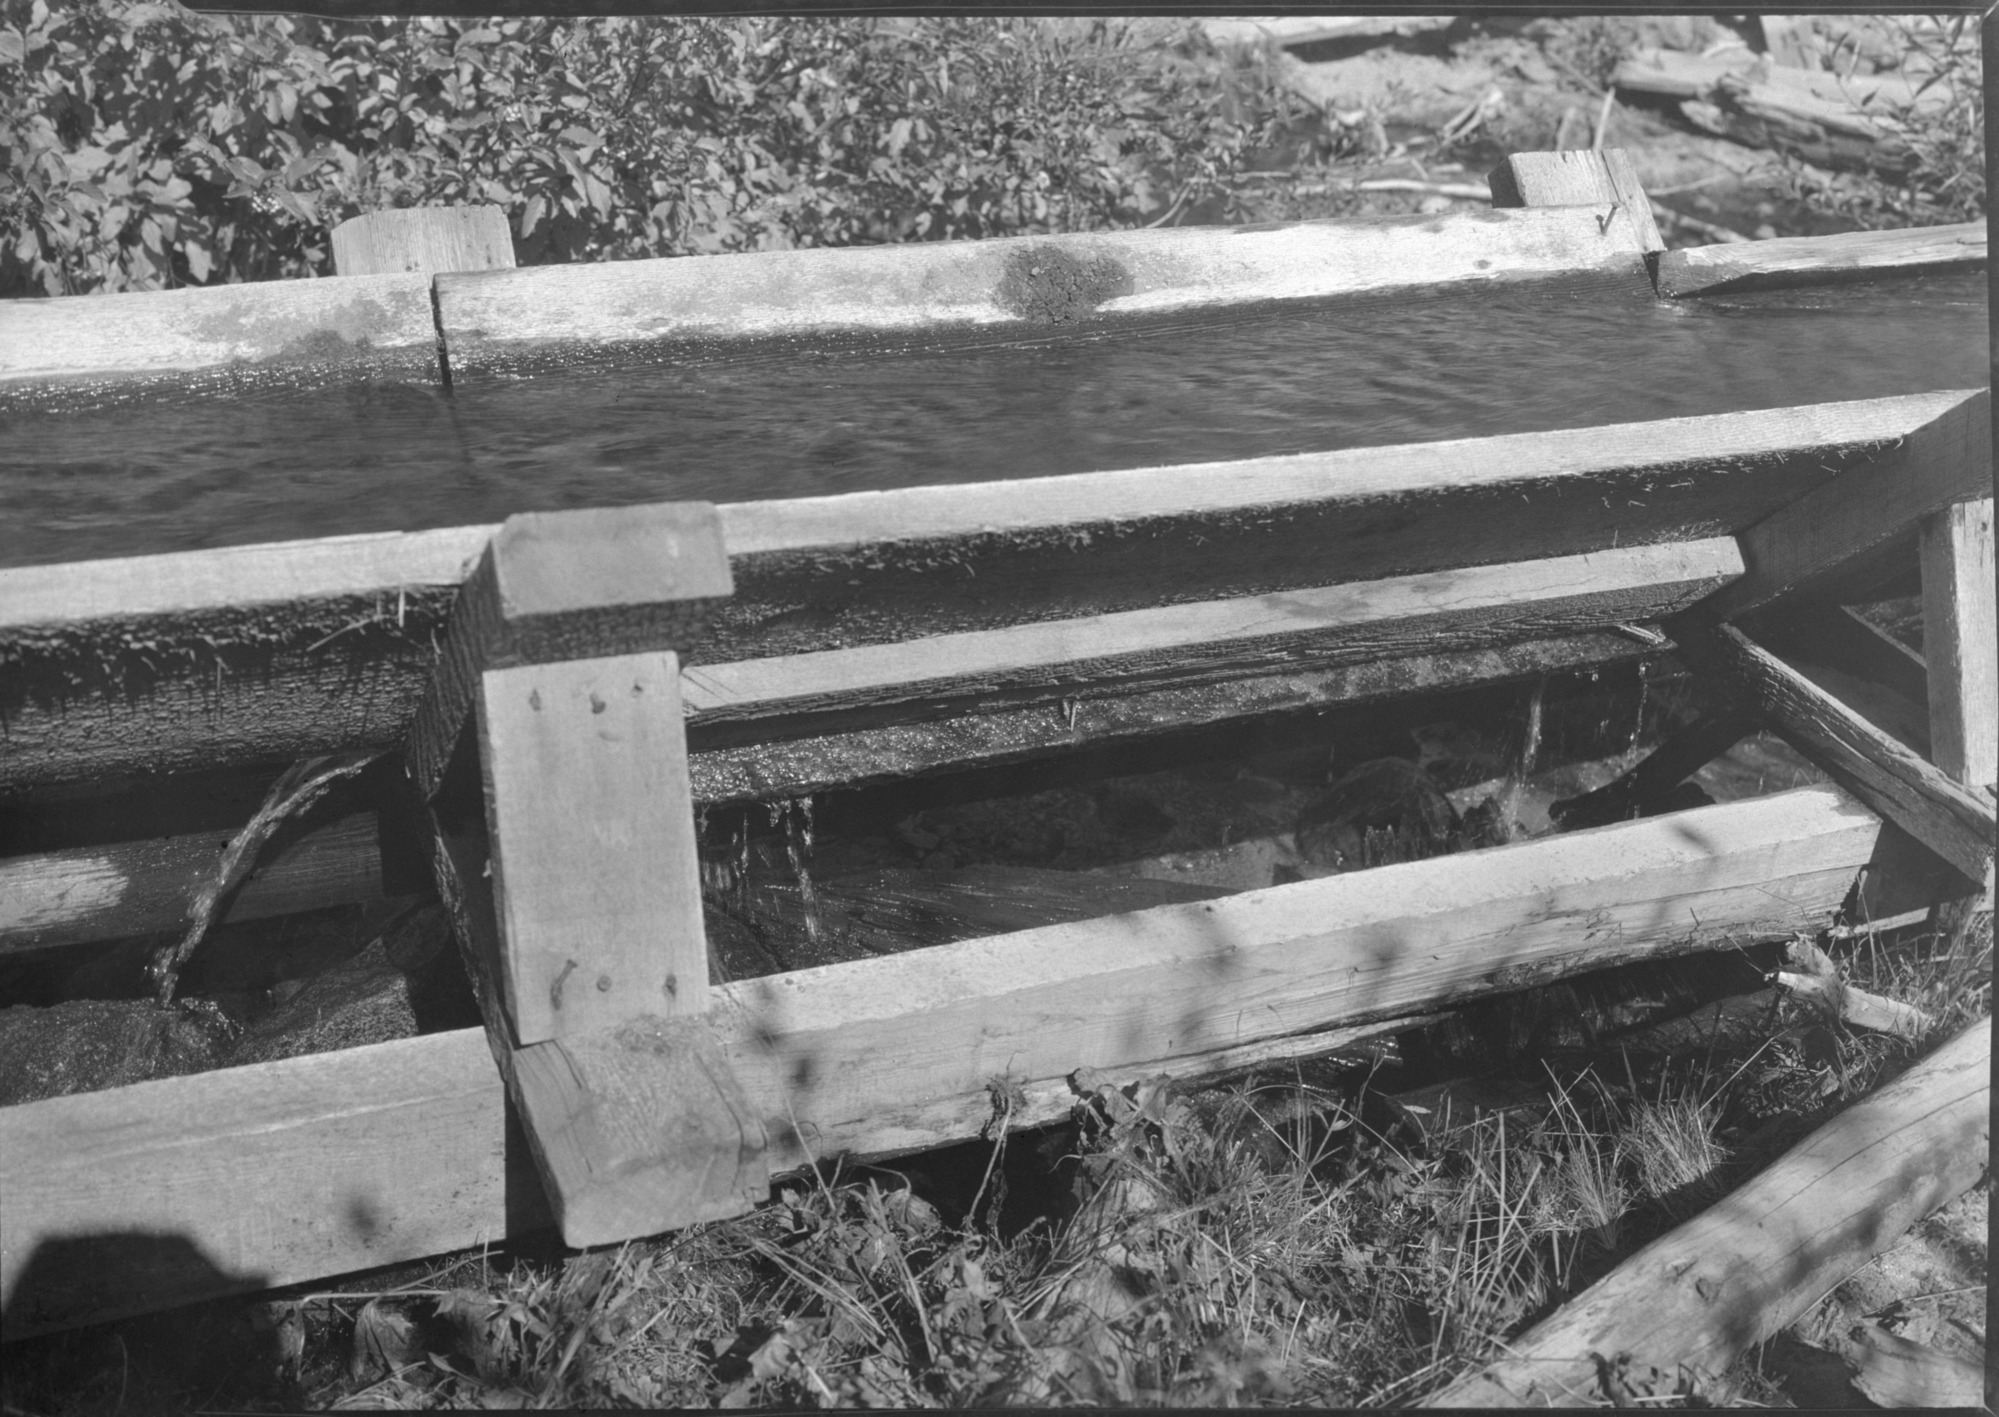 Sugar Pine Lumber Co. flume at Raynor Creek, showing leaky condition.